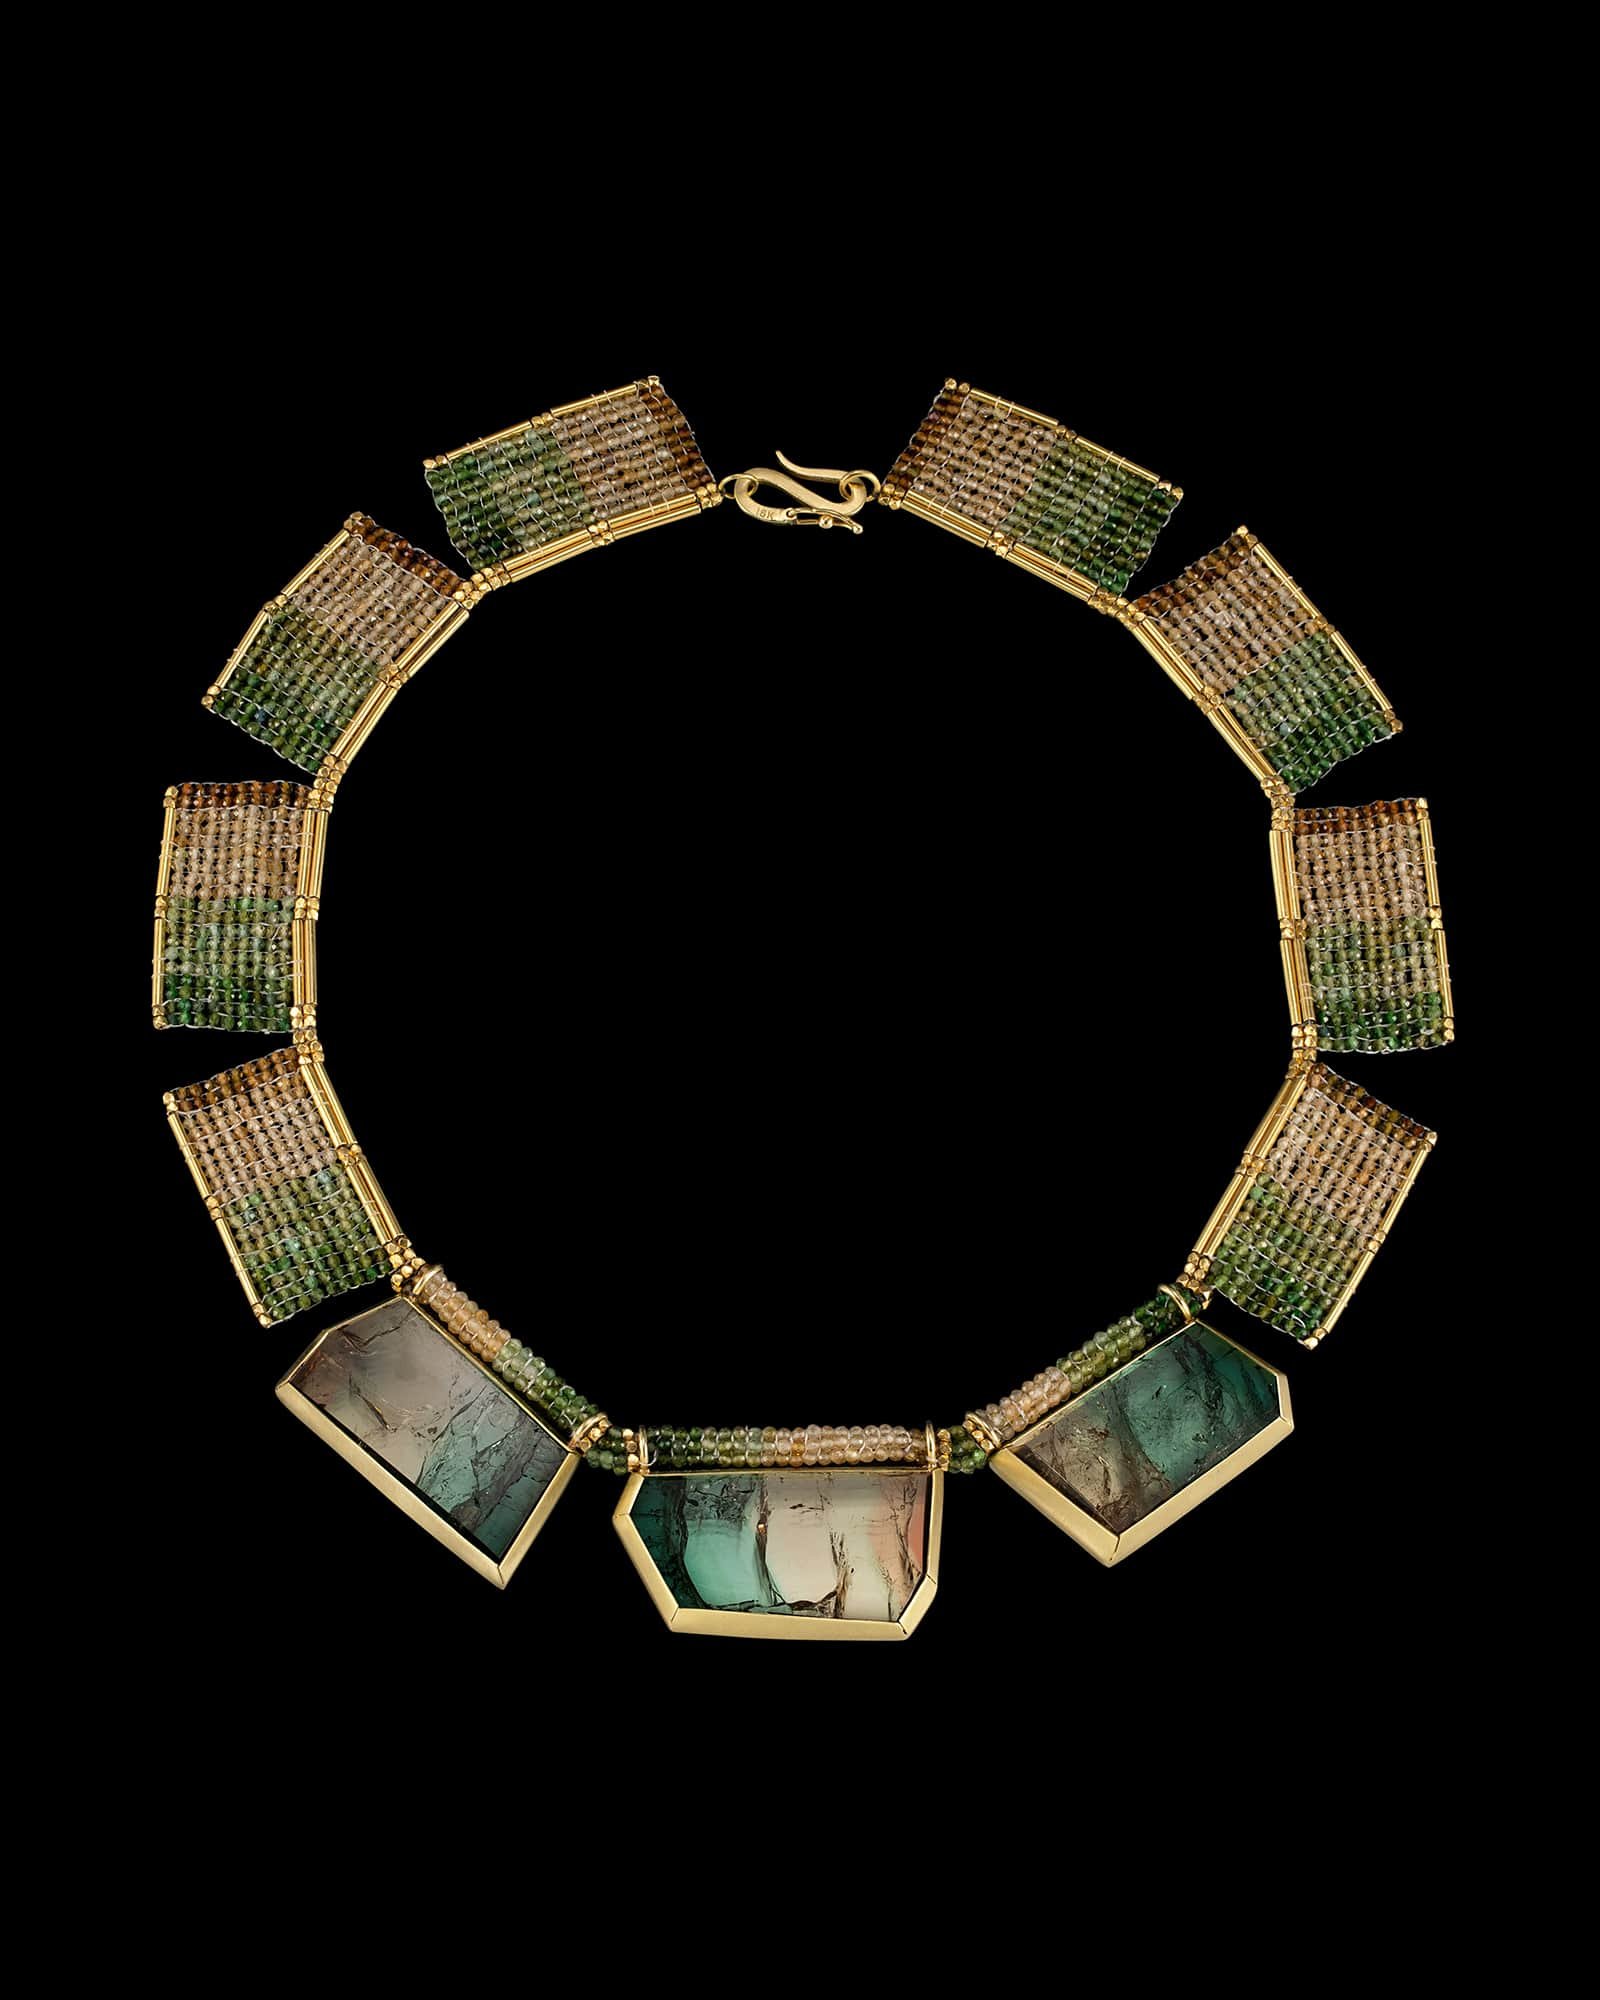 Landscape Collar (1).  Neckpiece is hand woven of multicolor tourmaline and 18k gold beads.  Bezels are hand fabricated of 18k gold, set with multicolor tourmaline slices.